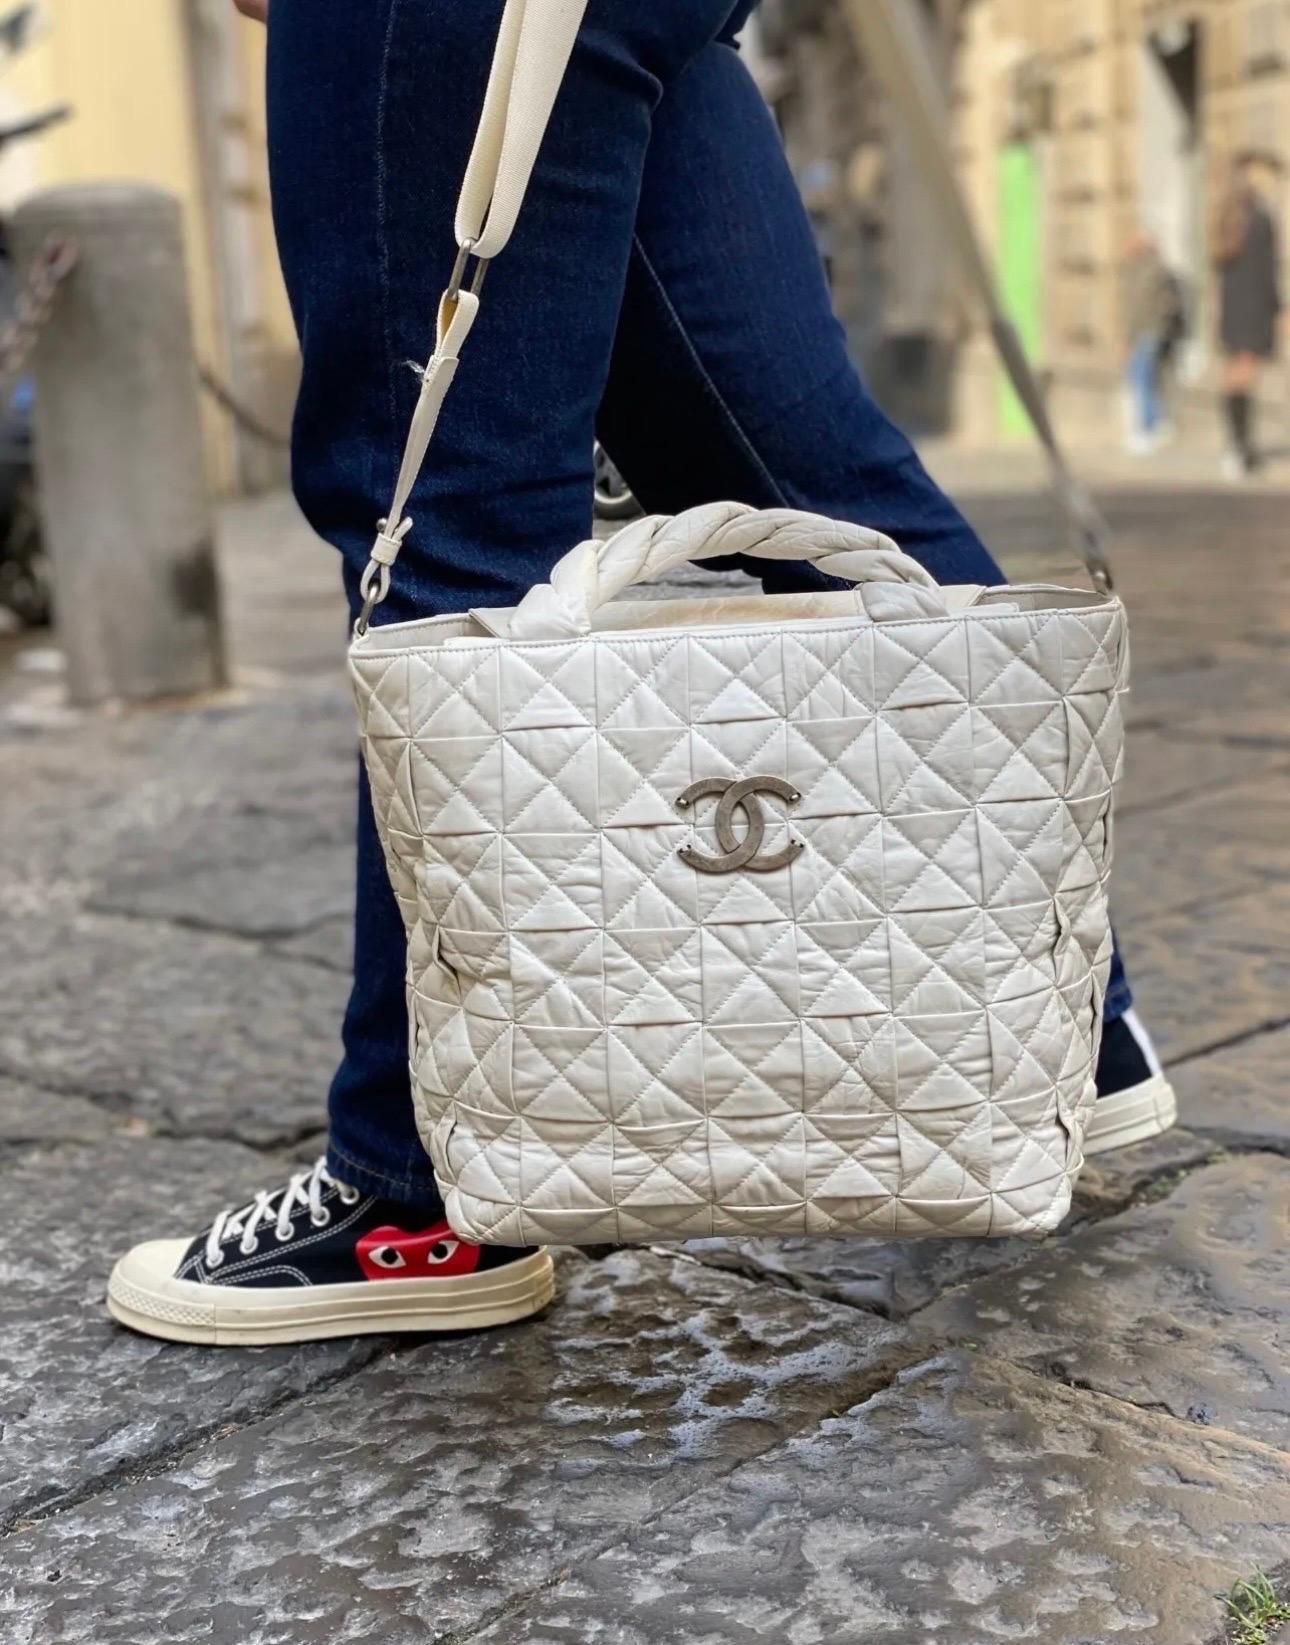 Chanel shopper bag, 2006-2008, in white leather with silver hardware.
It has a zip closure. The interior is lined with a soft white fabric and is equipped with two internal pockets including one with zip closure.
The bag is equipped with two handles